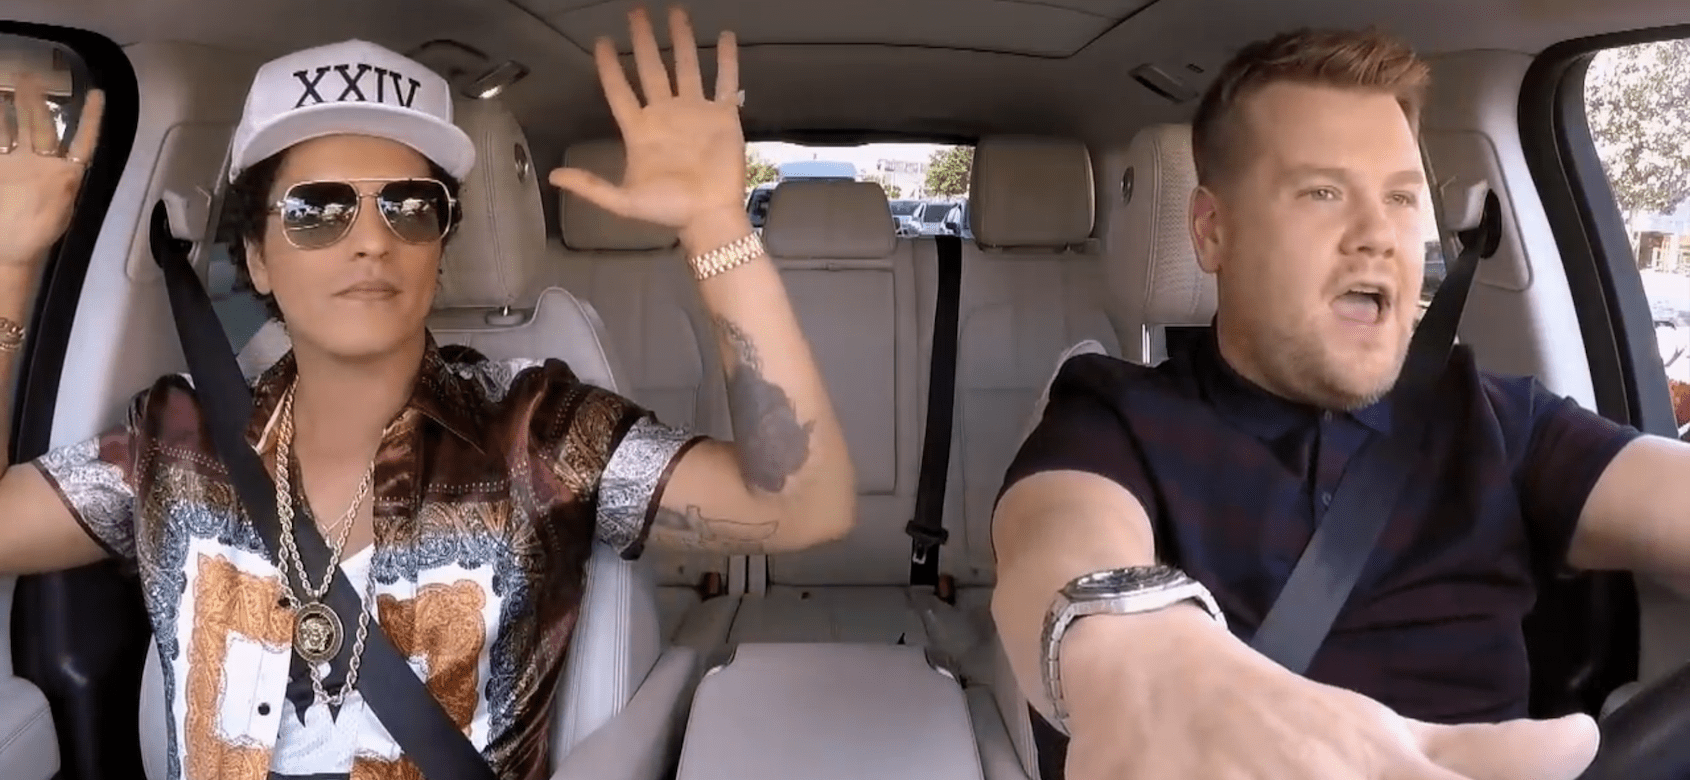 Looking back at the watches of Carpool Karaoke – from Paul McCartney to Bruno Mars